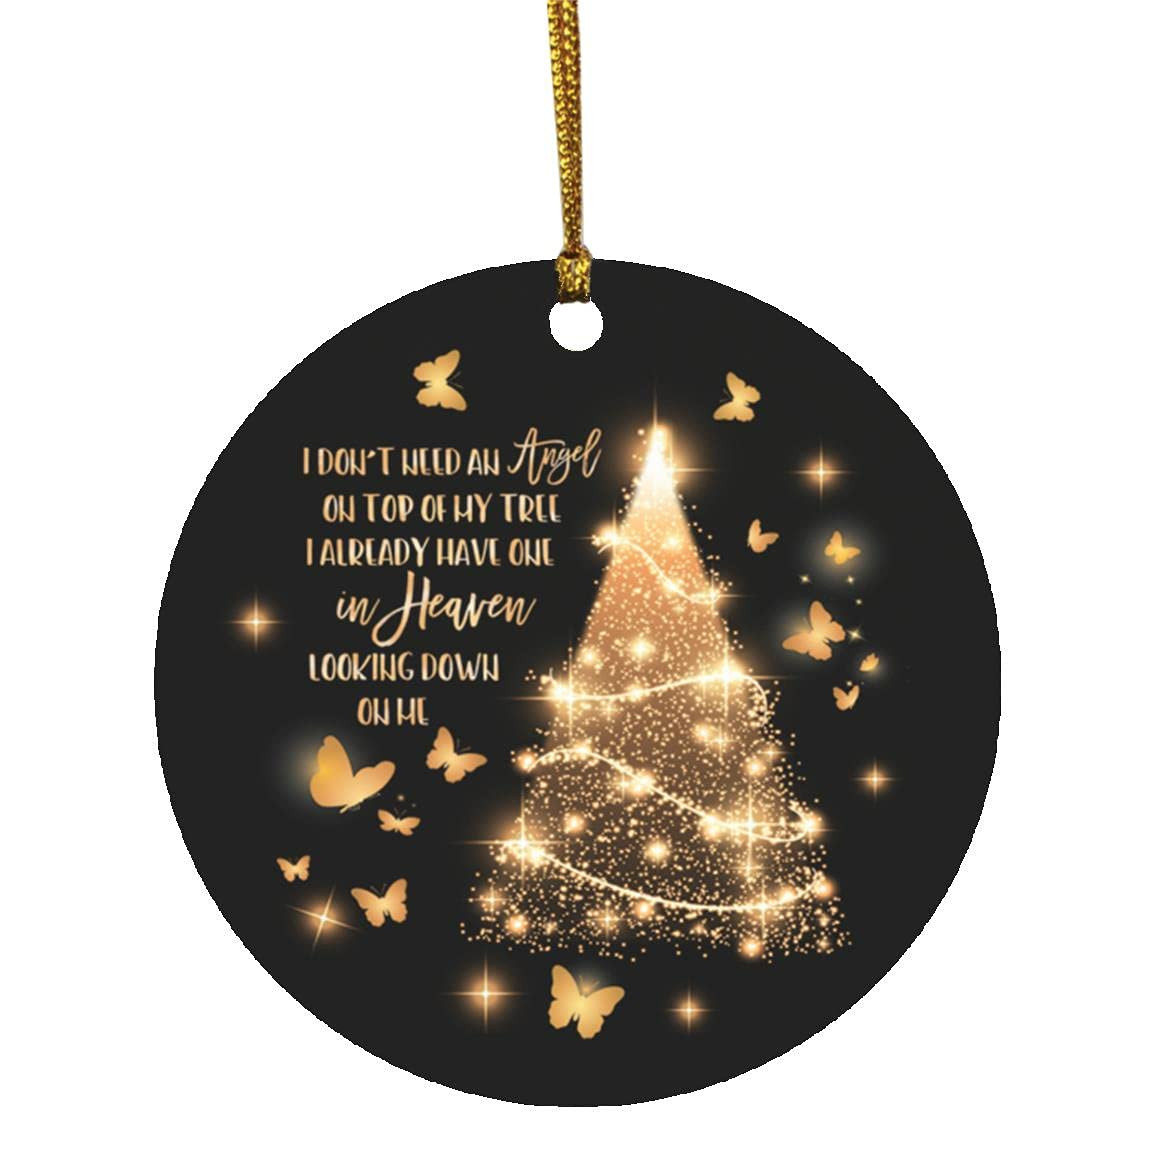 I Dont Need An Angel On Top Of My Tree Memorial Ornament Family Decoration Christmas Tree Decor Hanging Circle Ornament